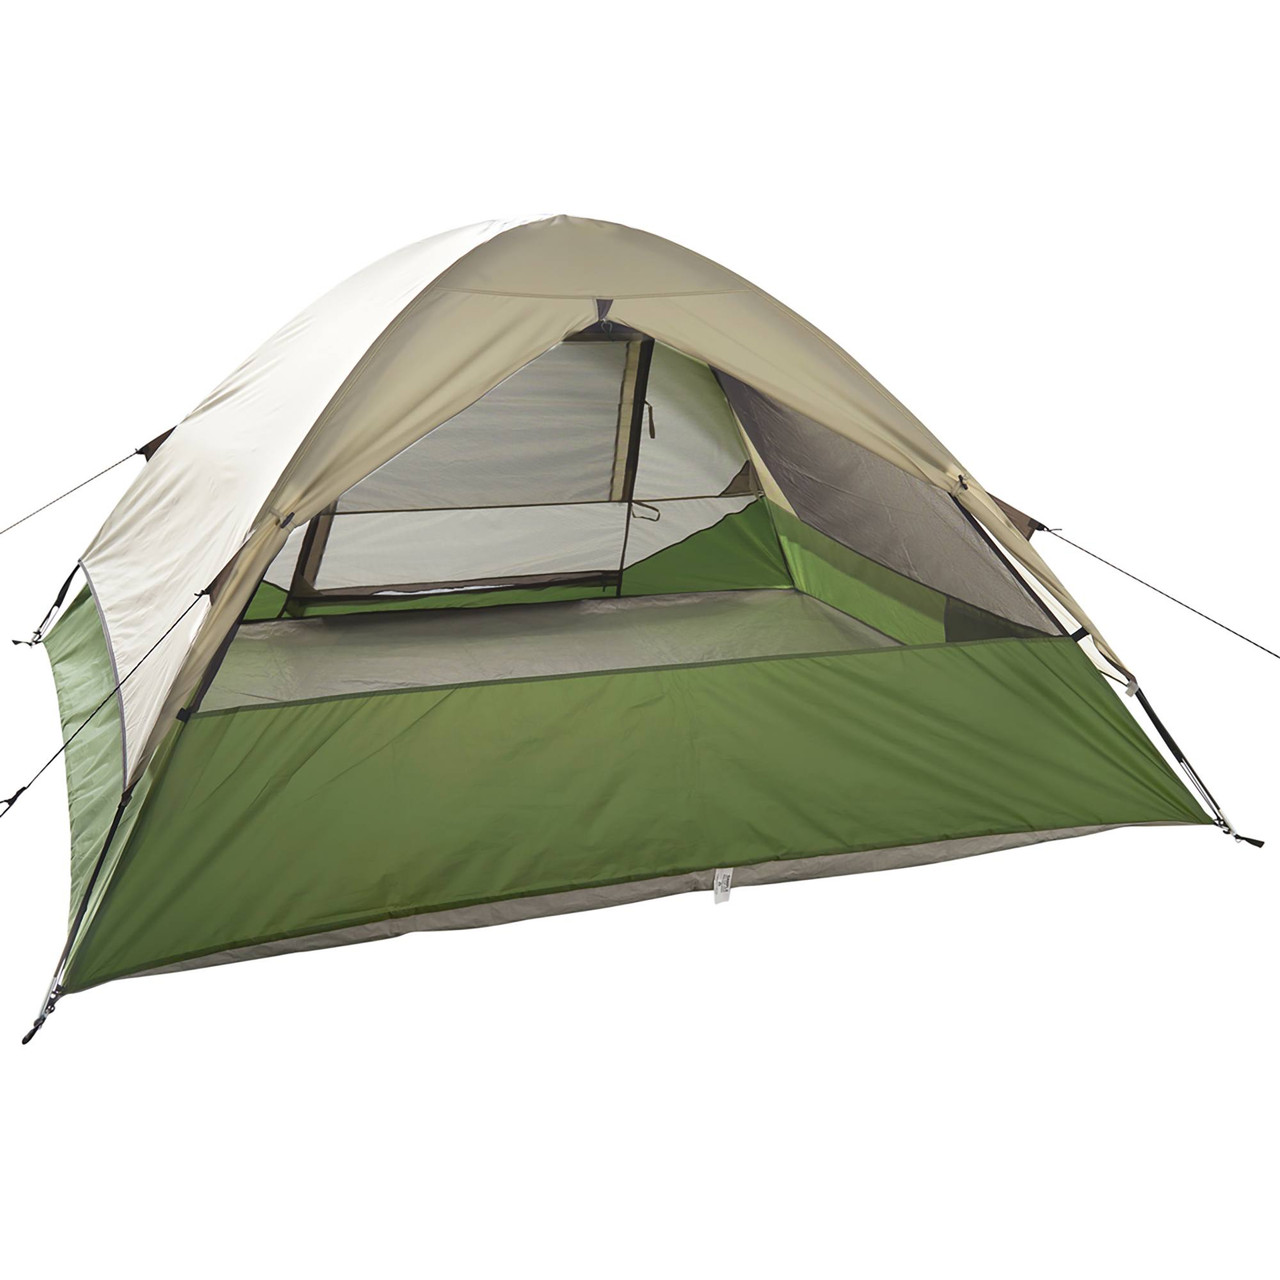 Wenzel Jack Pine 4 Person Dome Tent, green/white, rear view, with window opened